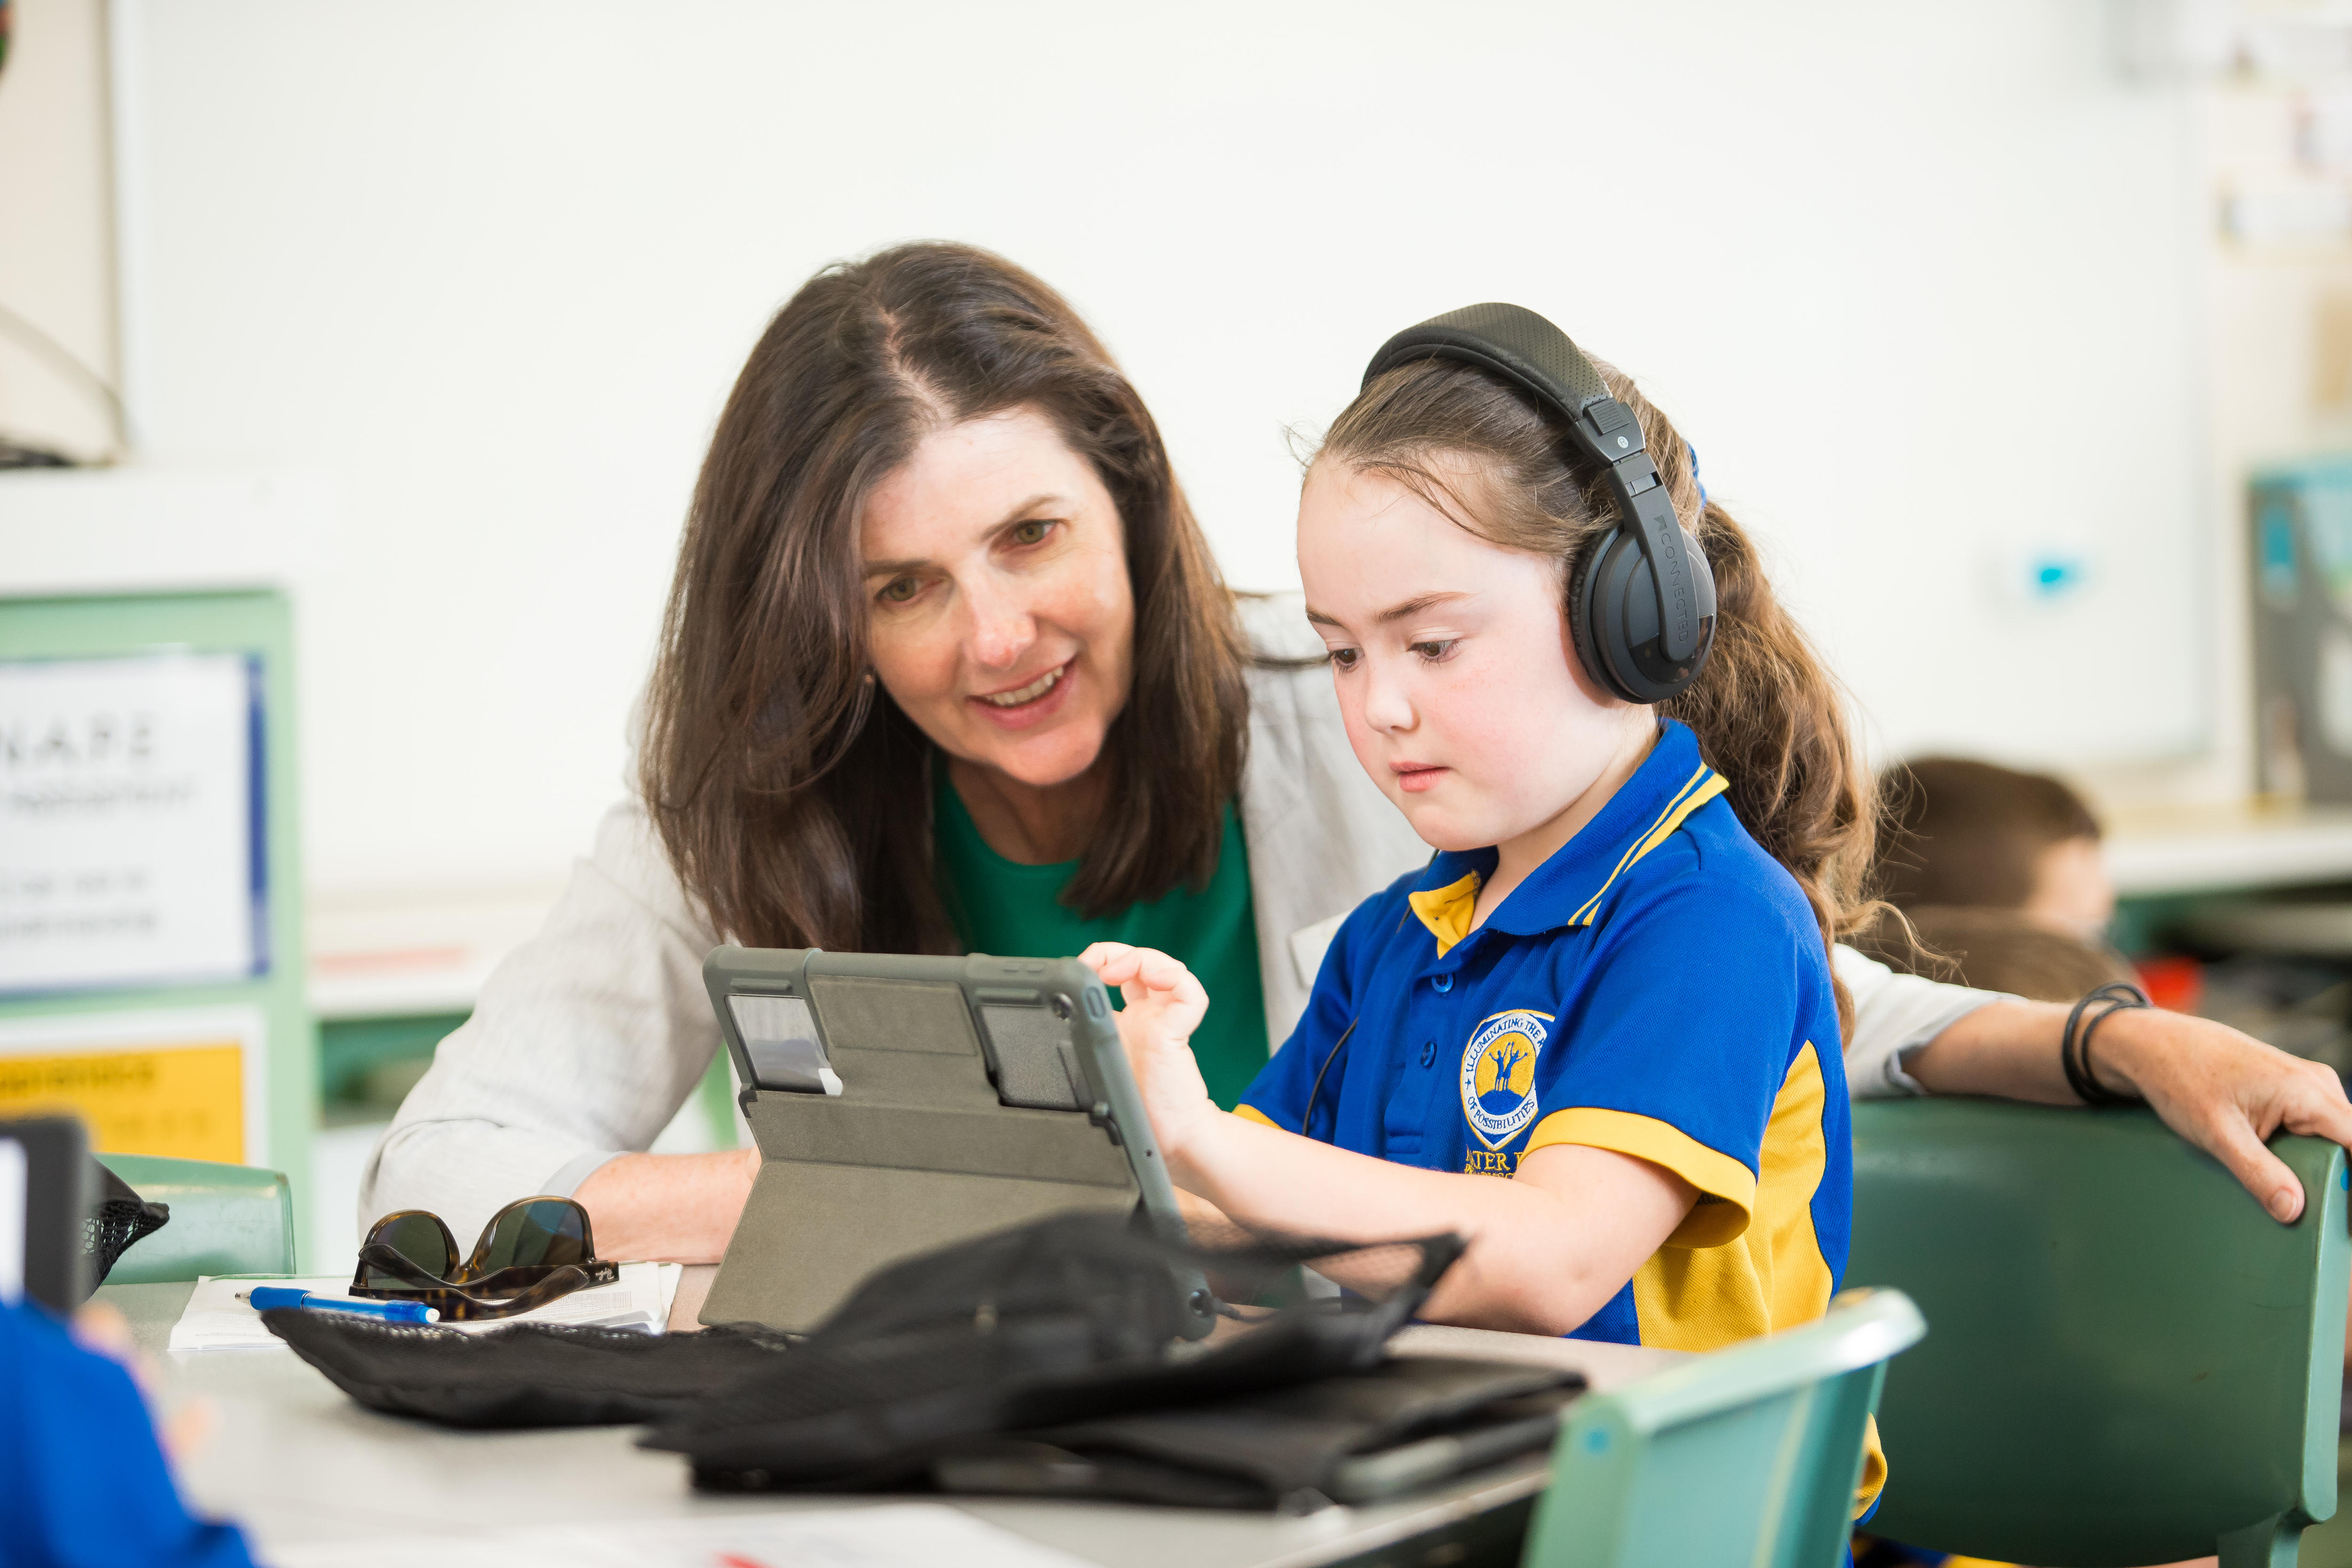 Female teacher looks over the shoulder of a young student using an ipad.